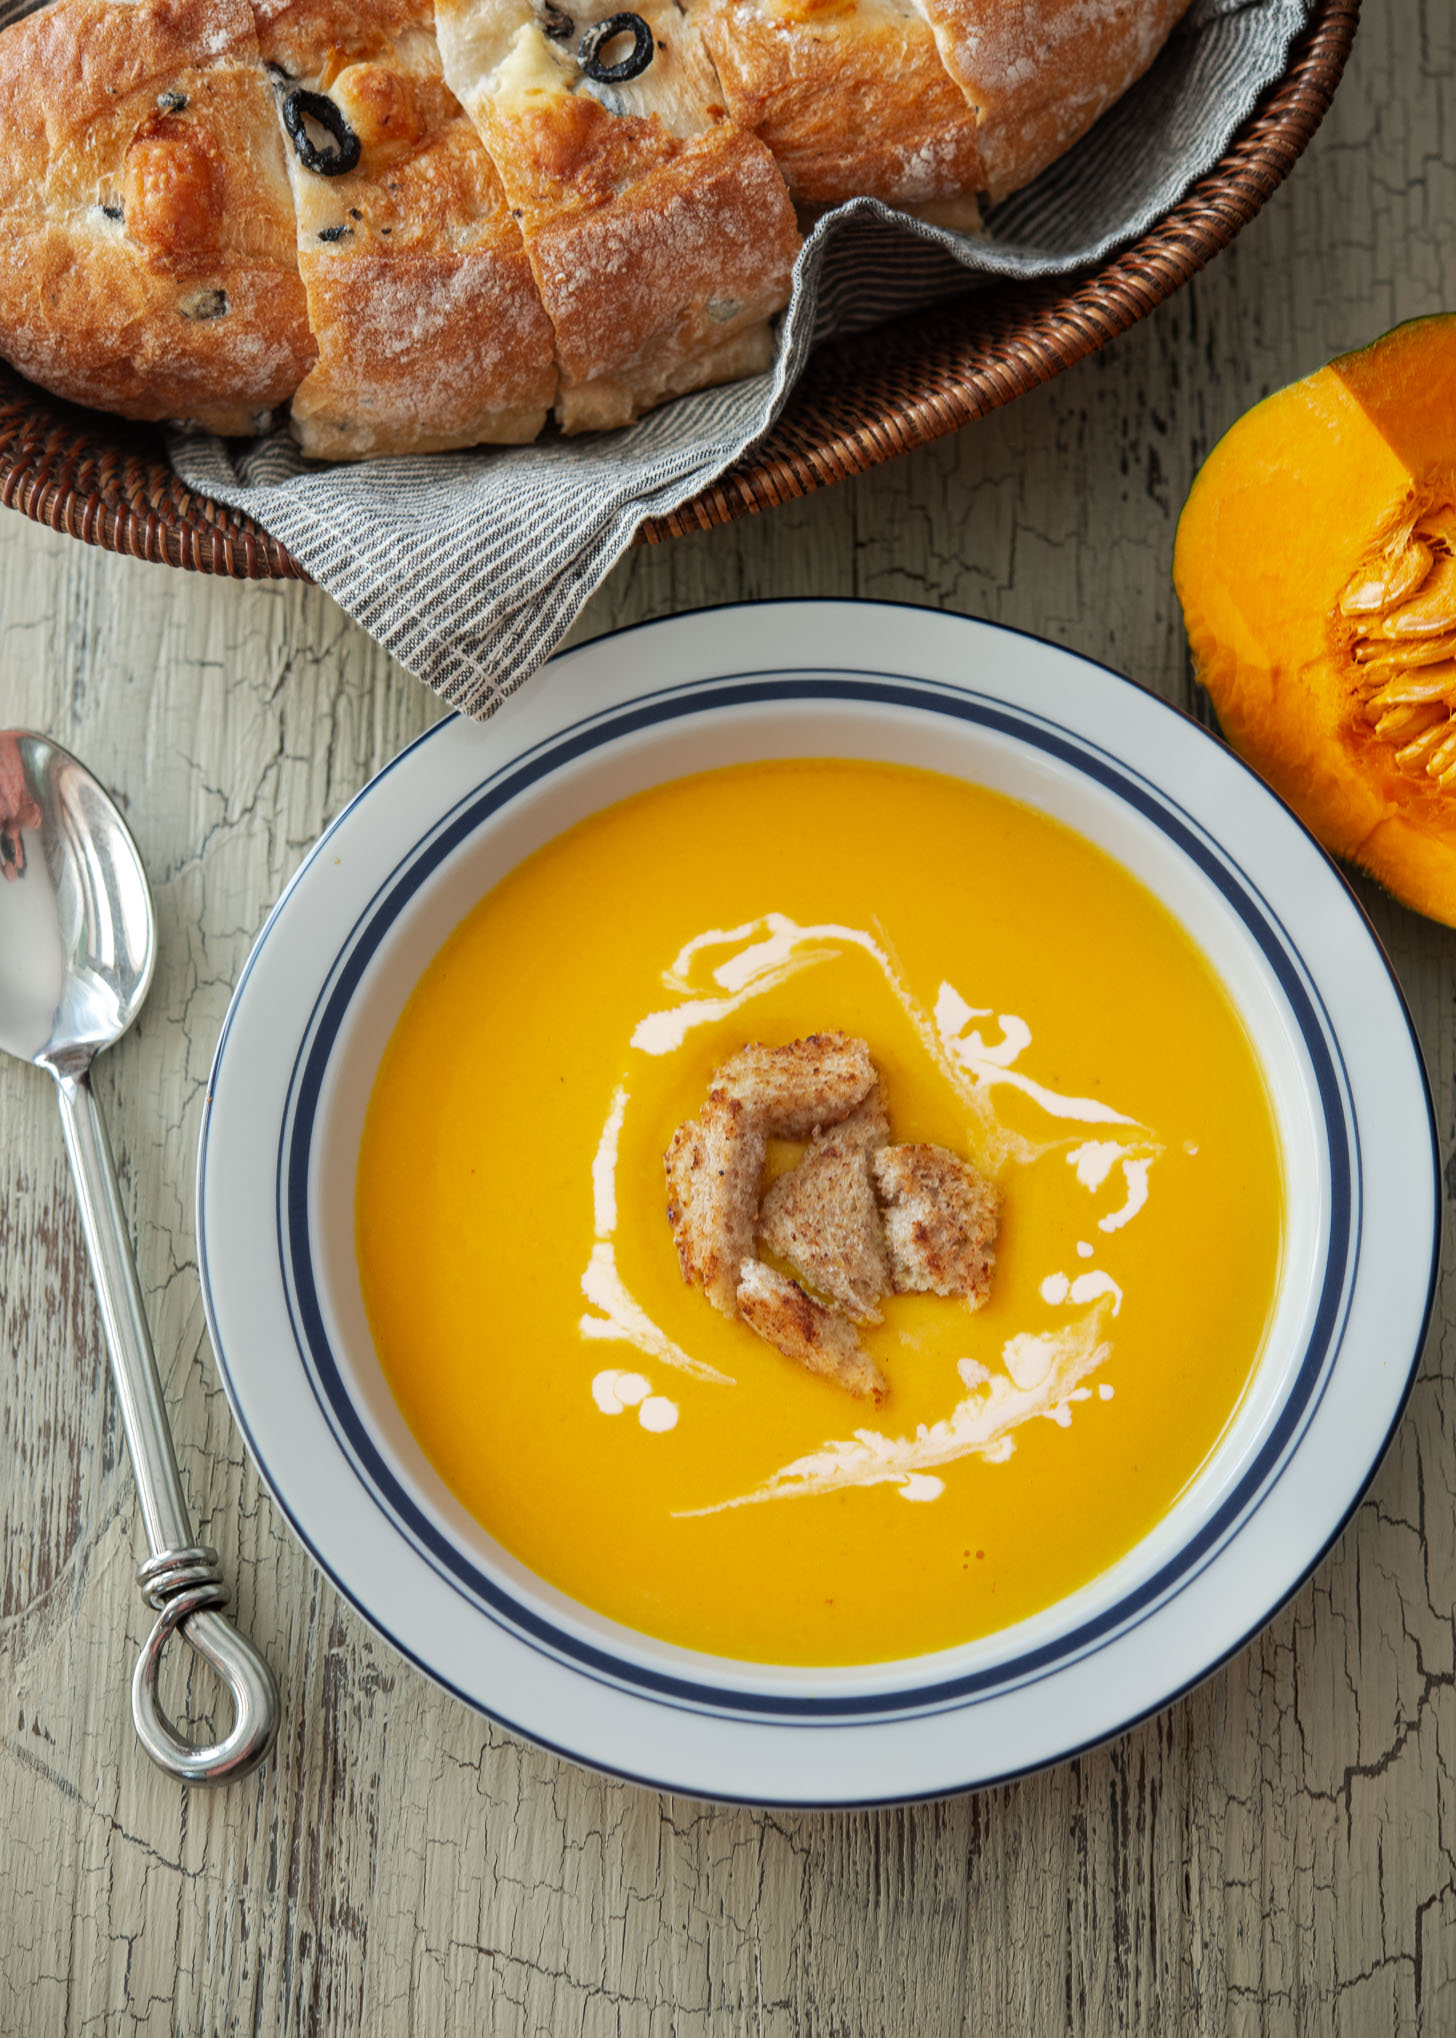 A bowl of kabocha squash soup garnished with cream and crouton.